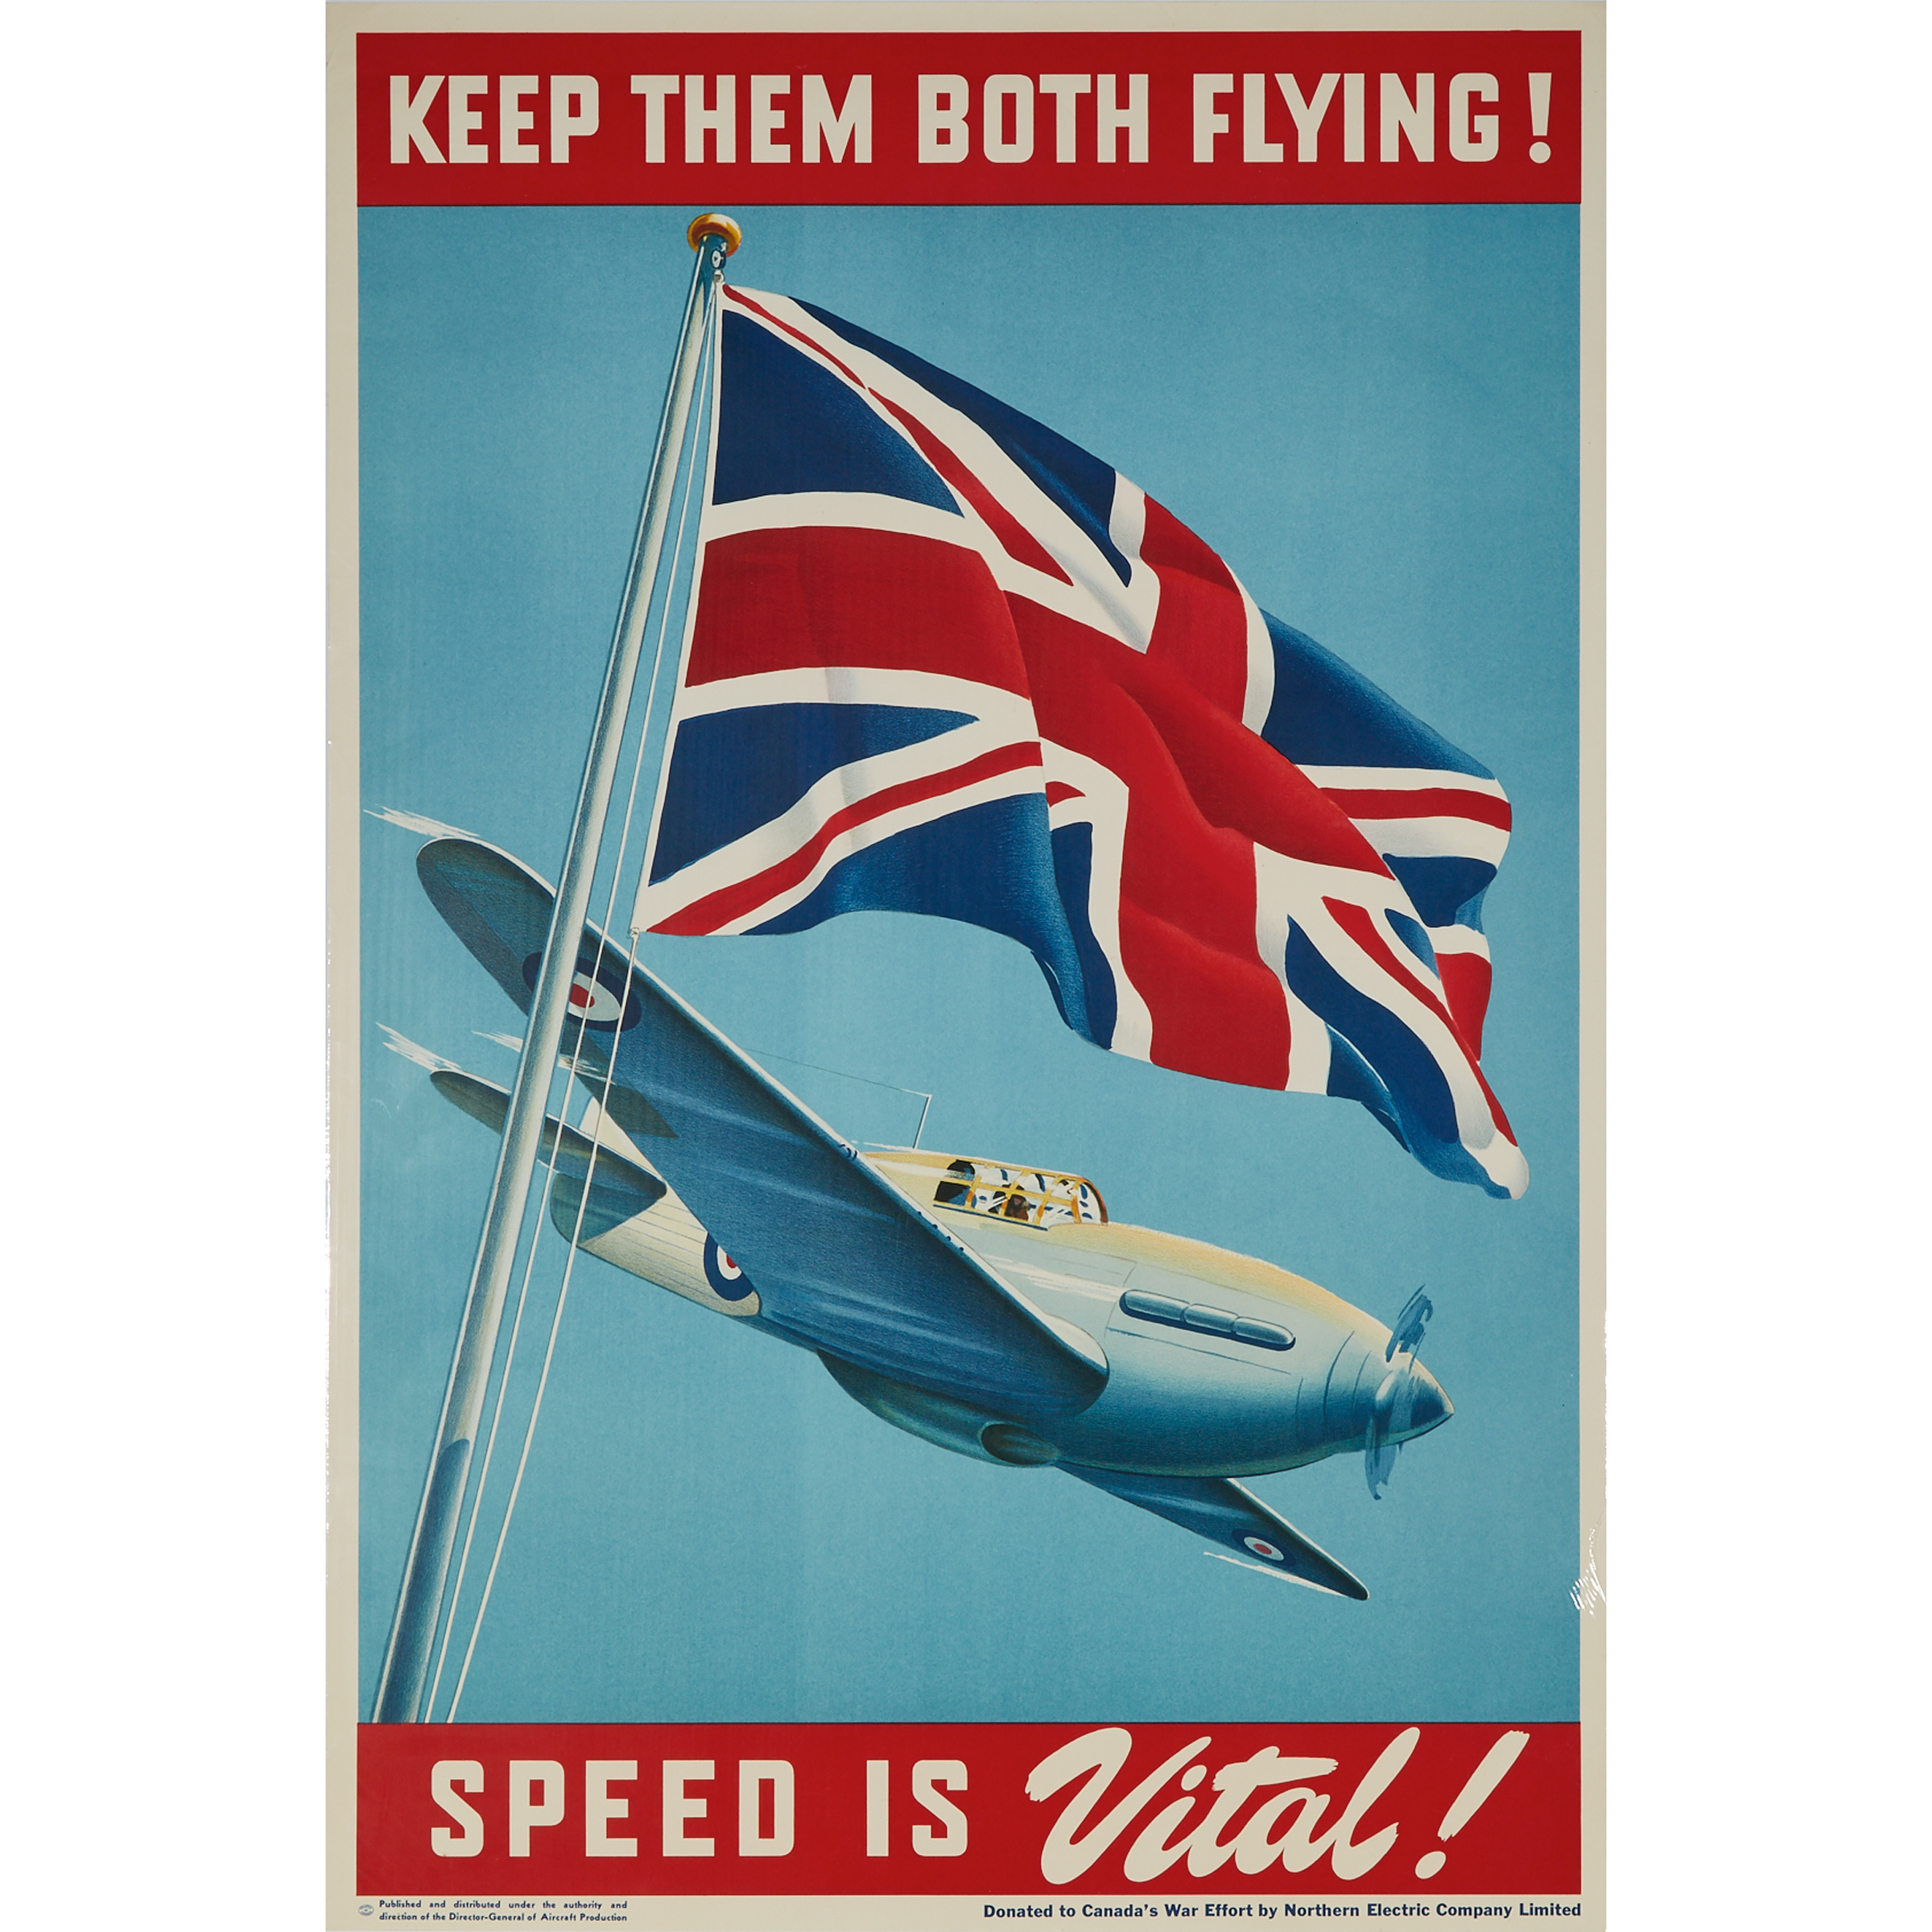 Two Canadian WWII Propaganda Posters, c.1943